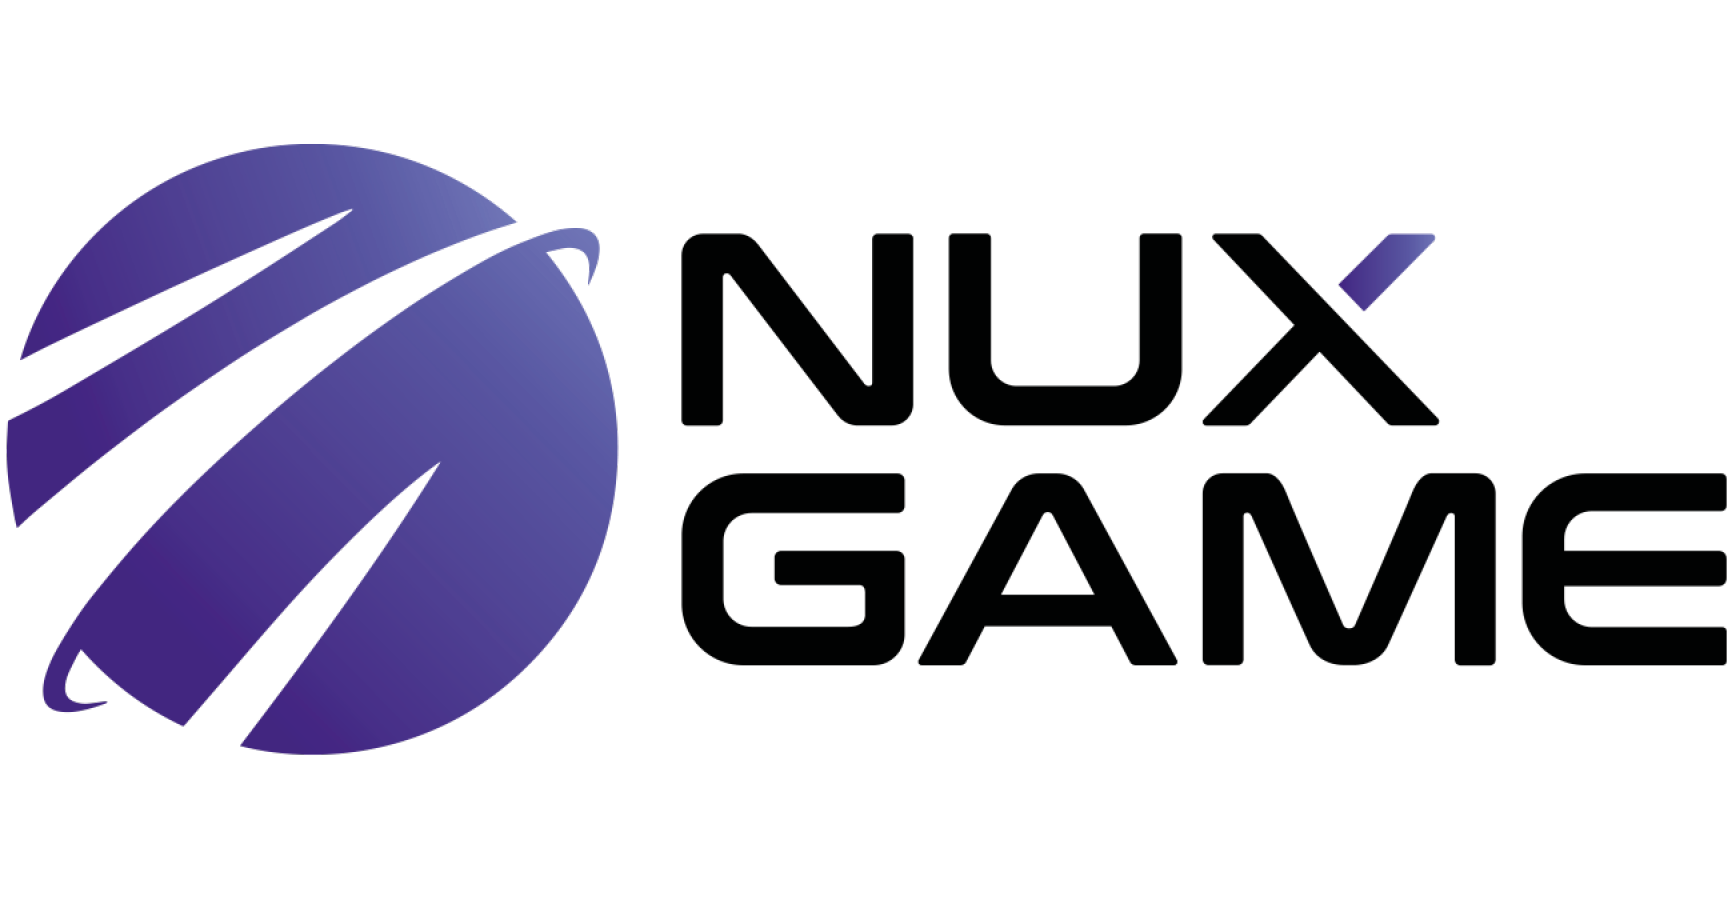 NuxGame bolsters personalisation capabilities with Solitics partnership